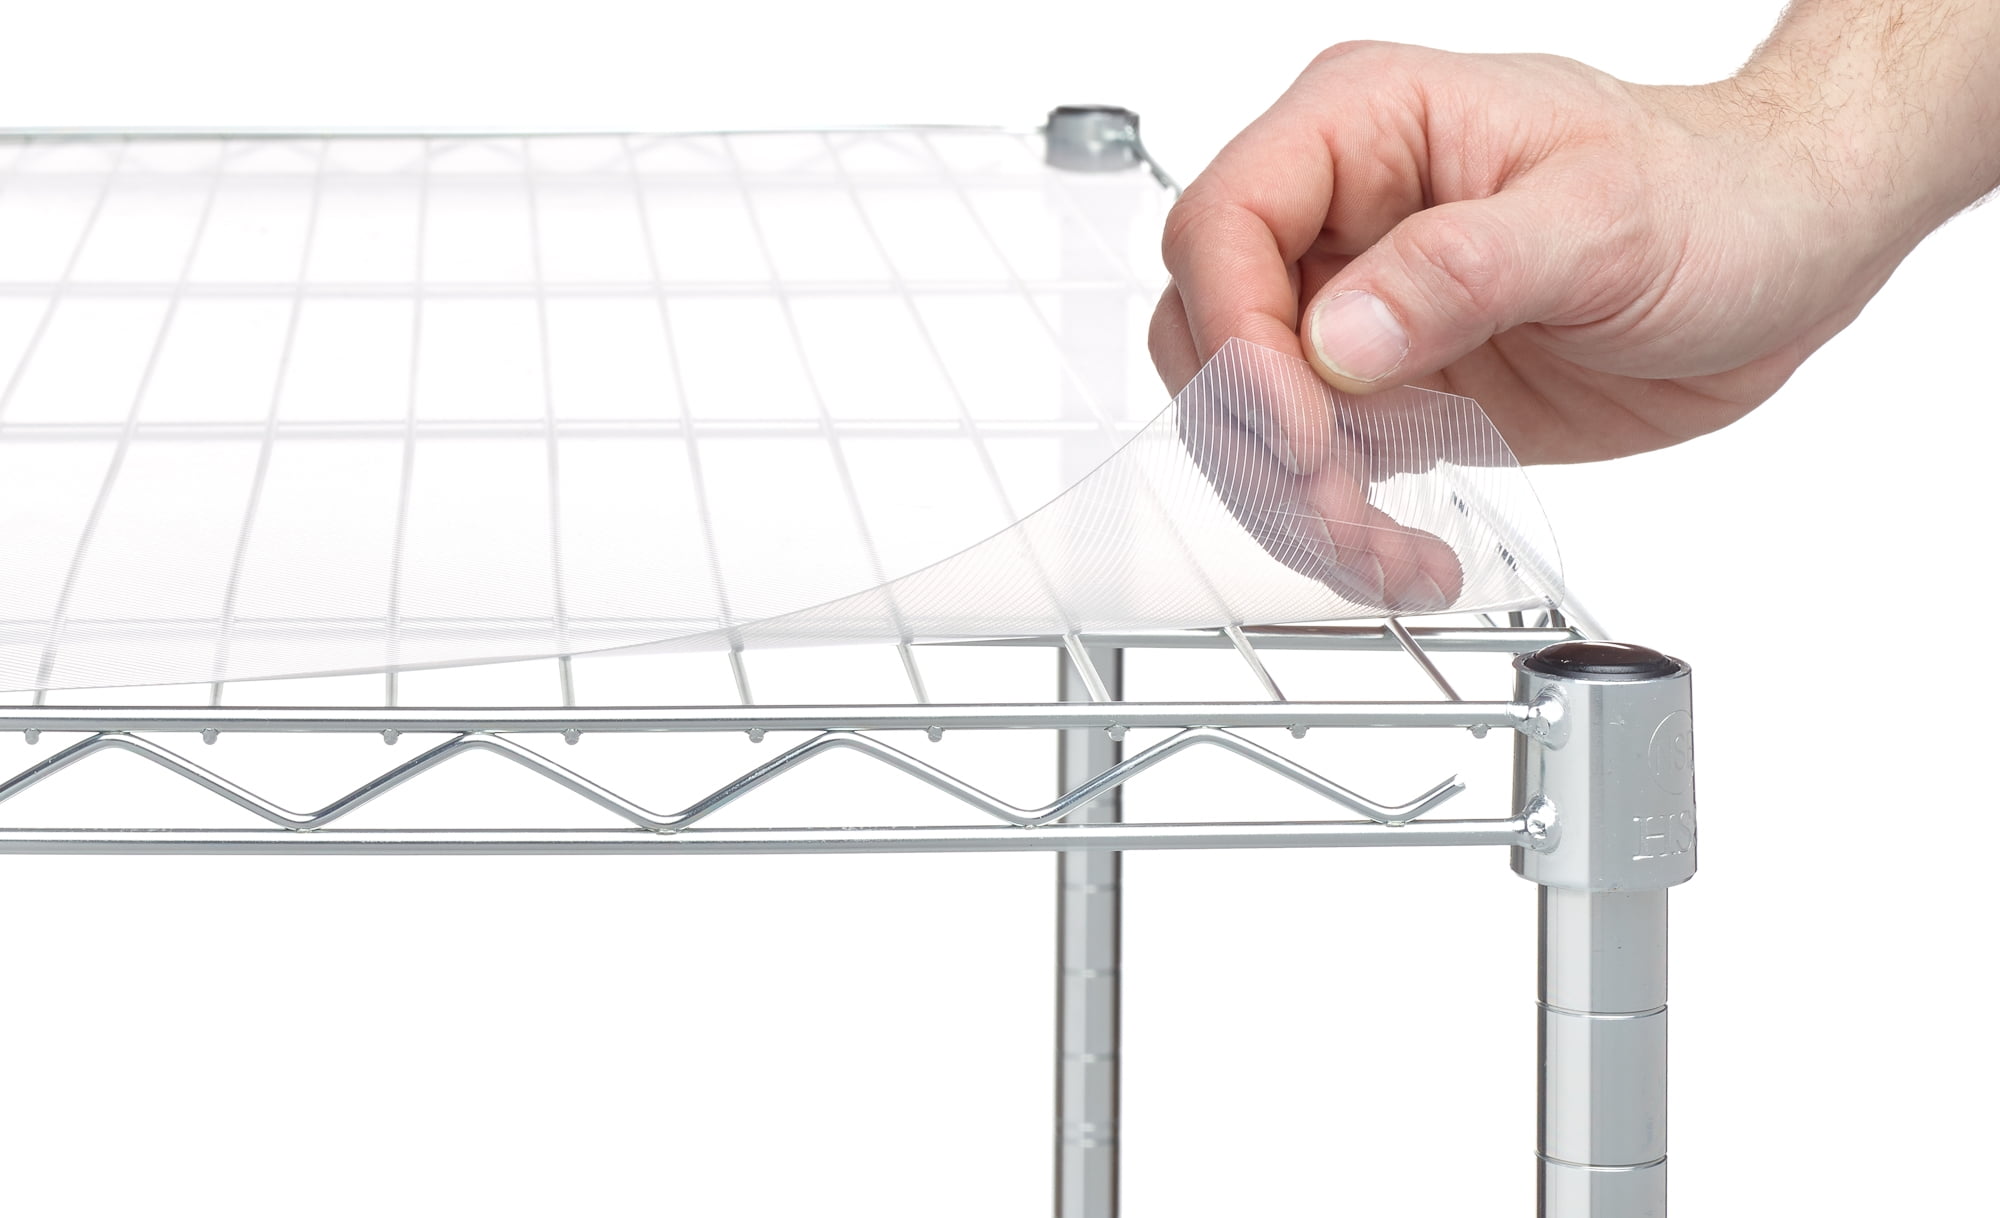 Hss Wire Shelf Liners For 18 X 48, Shelf Liner For Wire Shelving